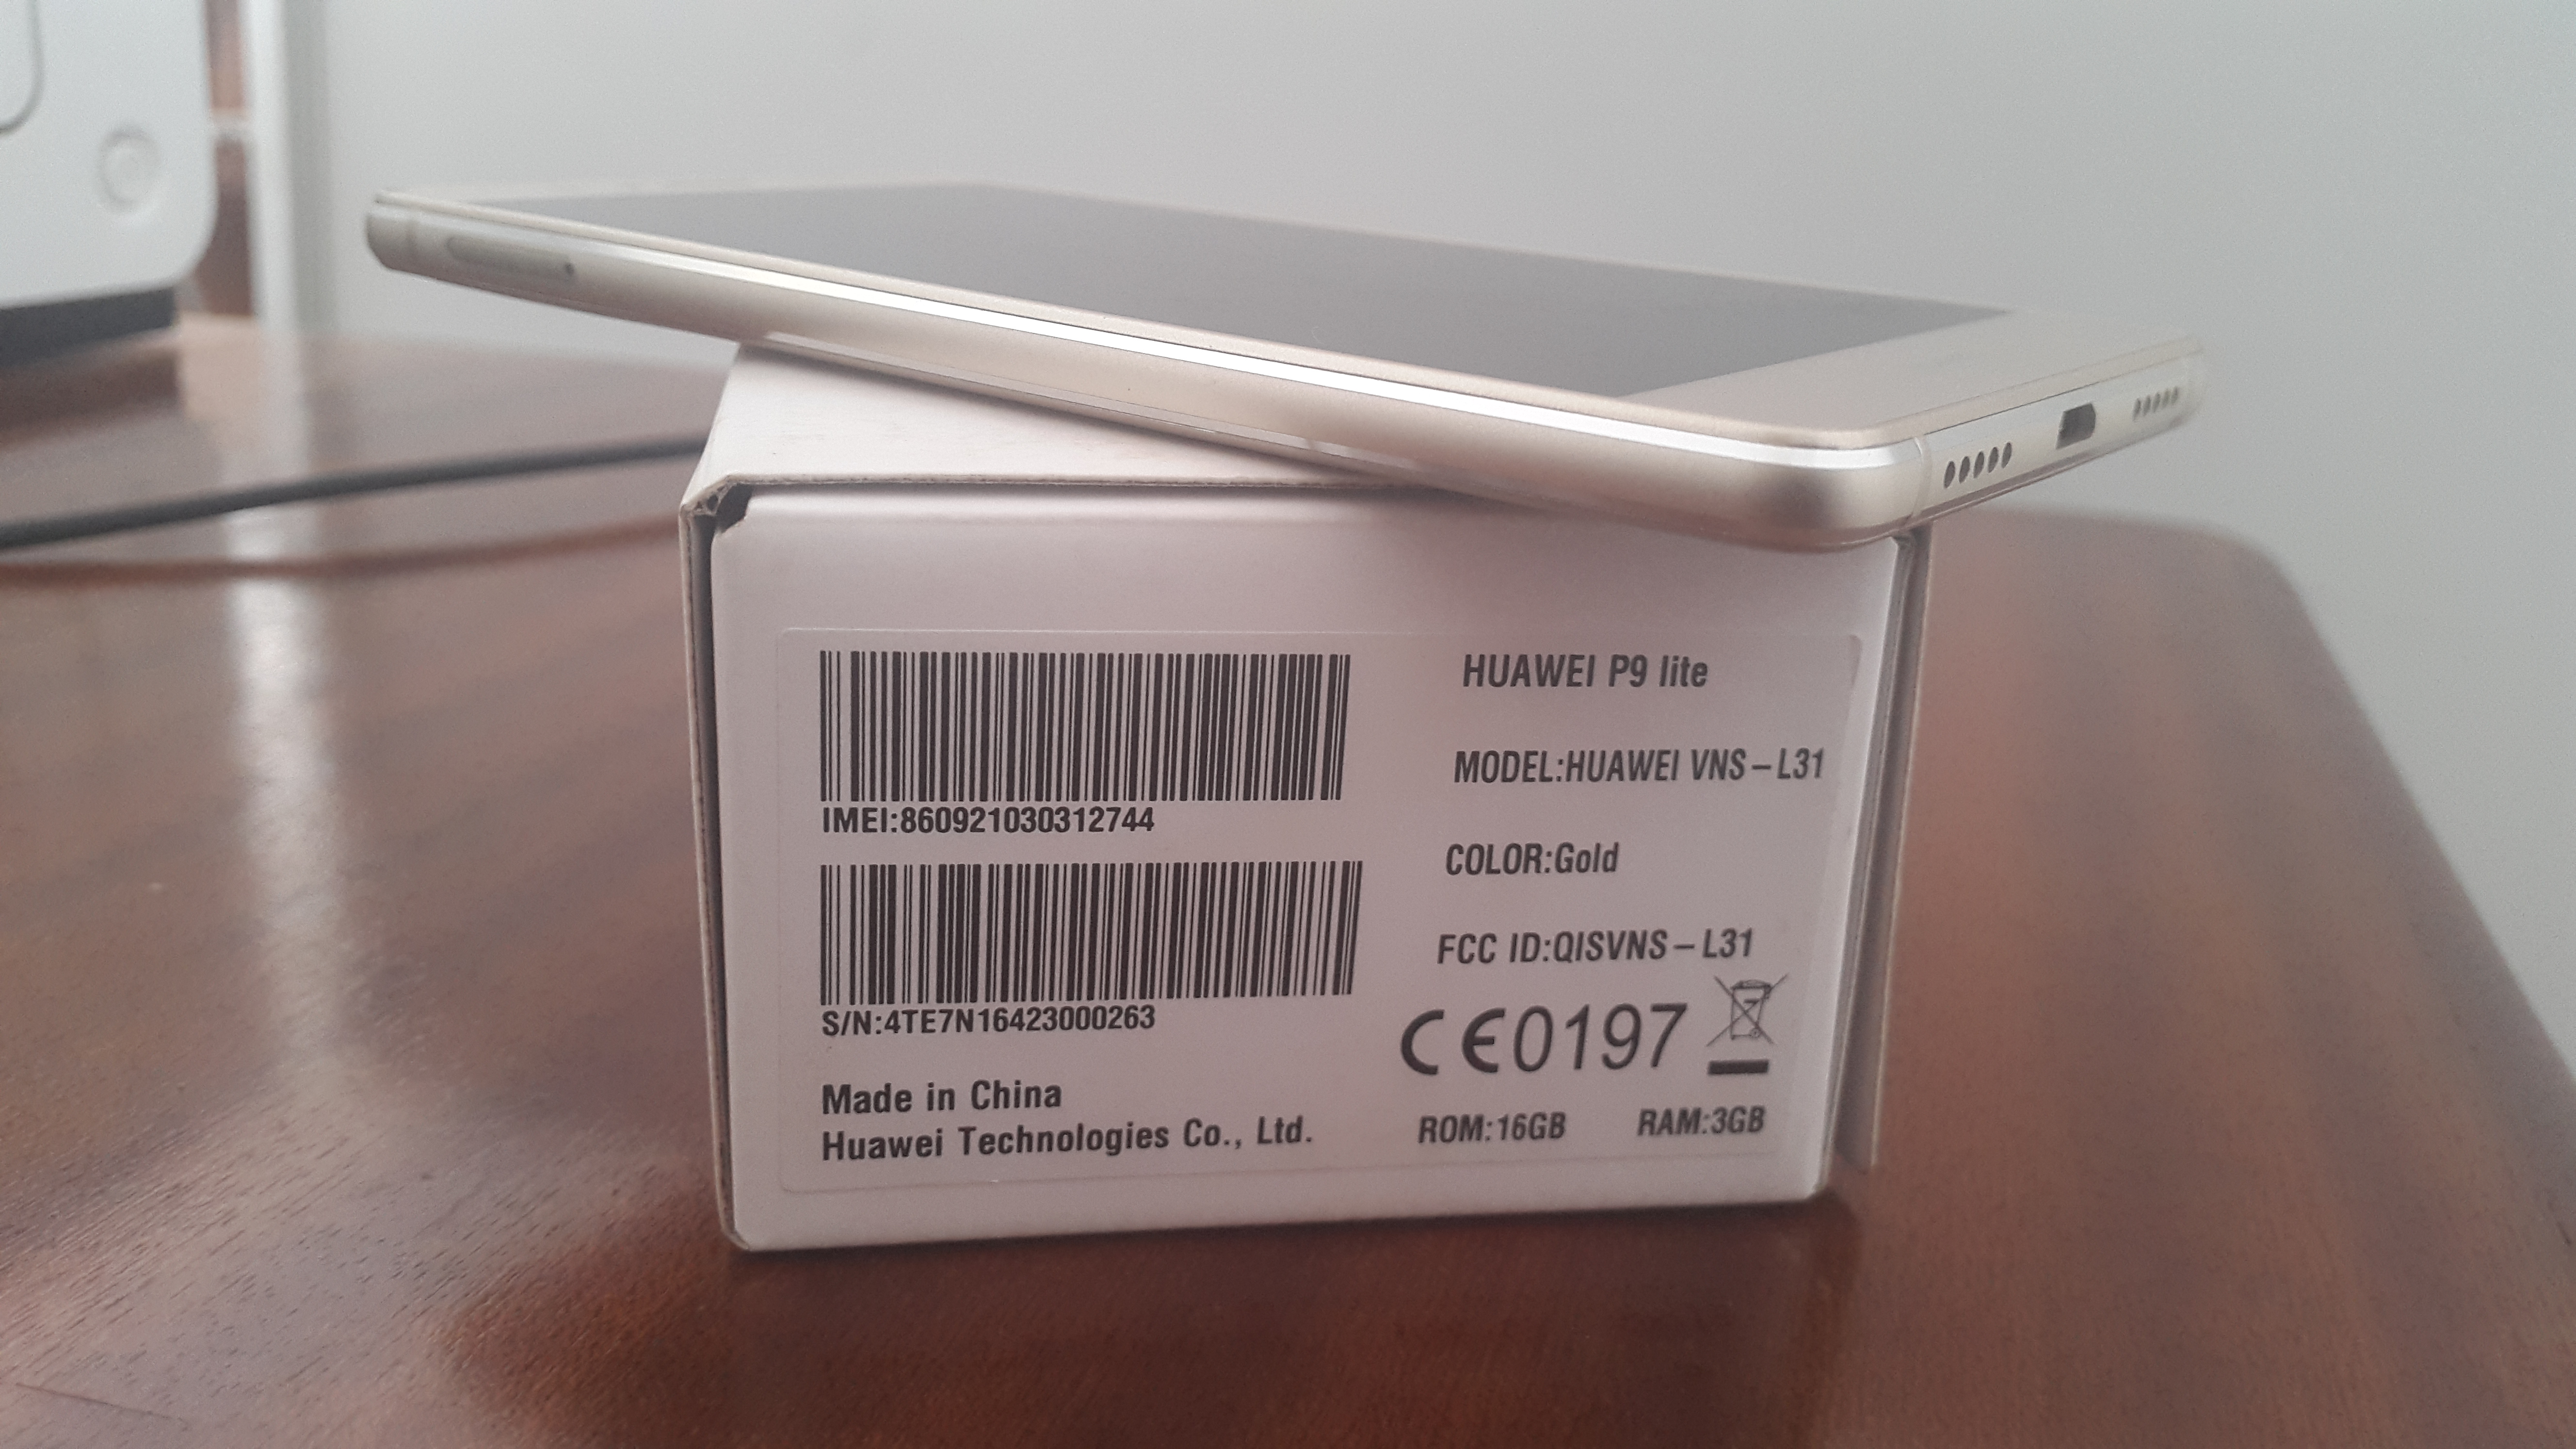 Photo of Huawei P9 Lite: Unboxing and Specs